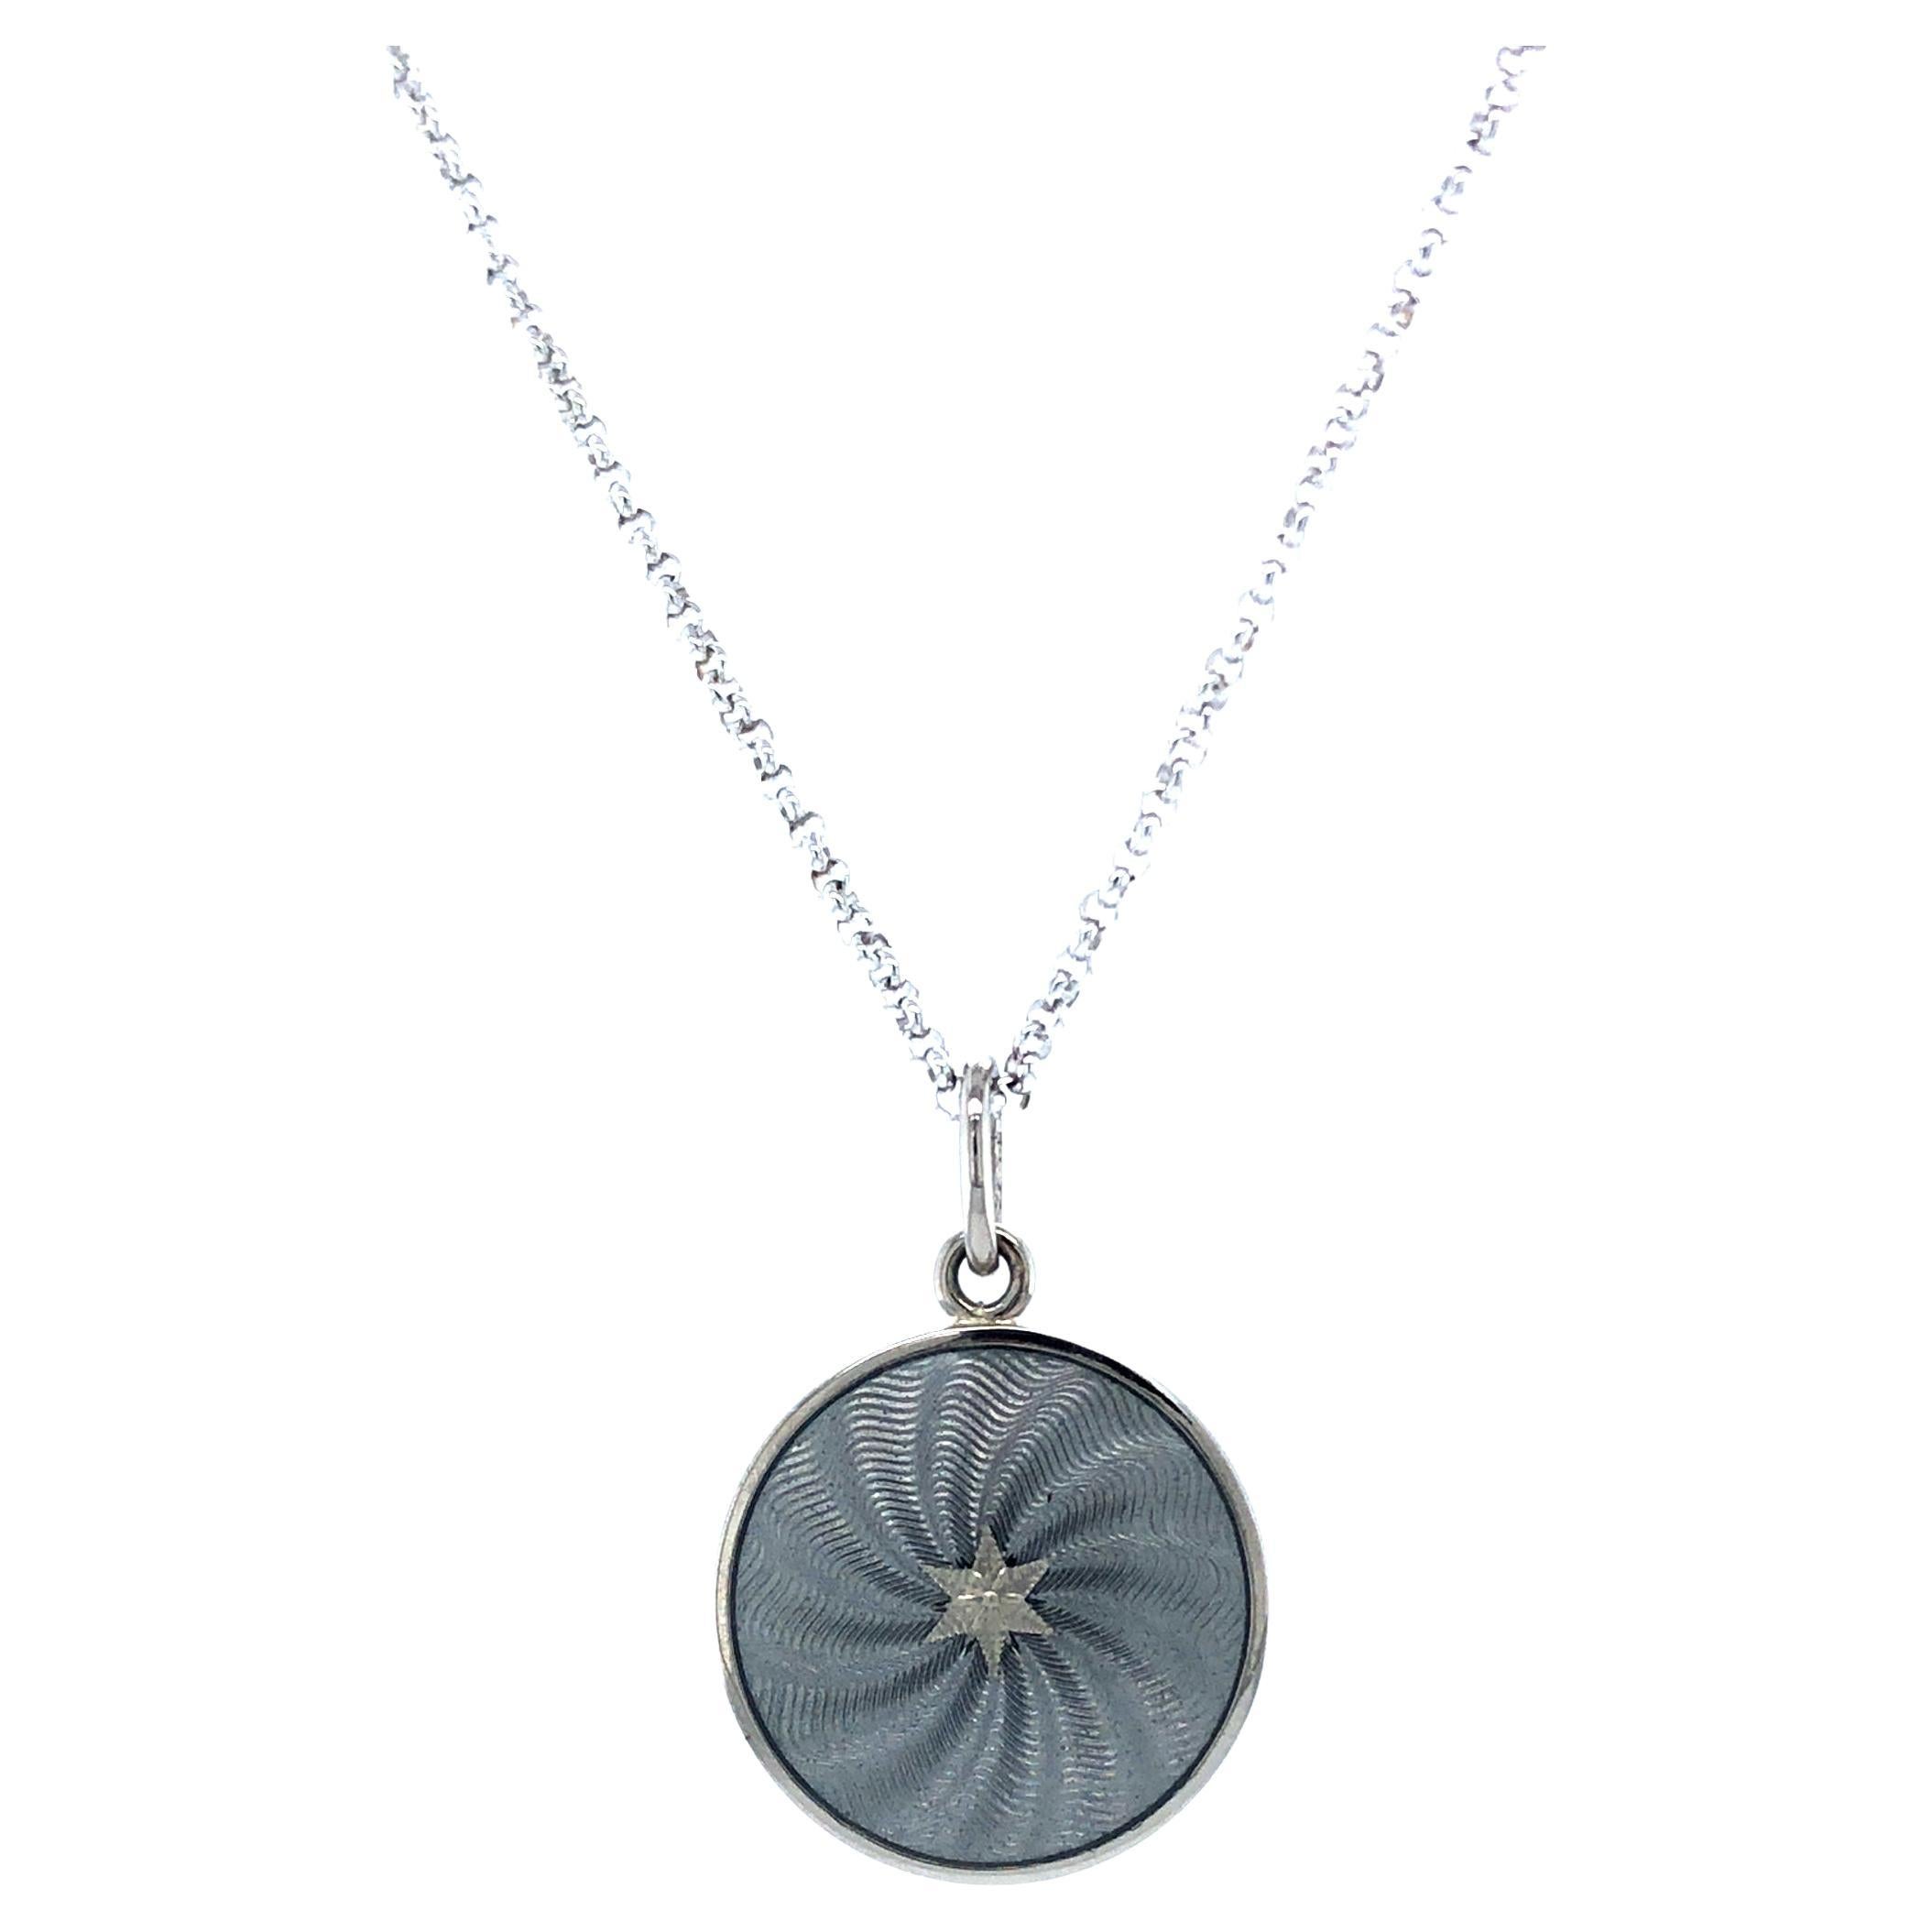 Round Disk Pendant Necklace 18k White Gold Silver Enamel Guilloche Gold Paillons